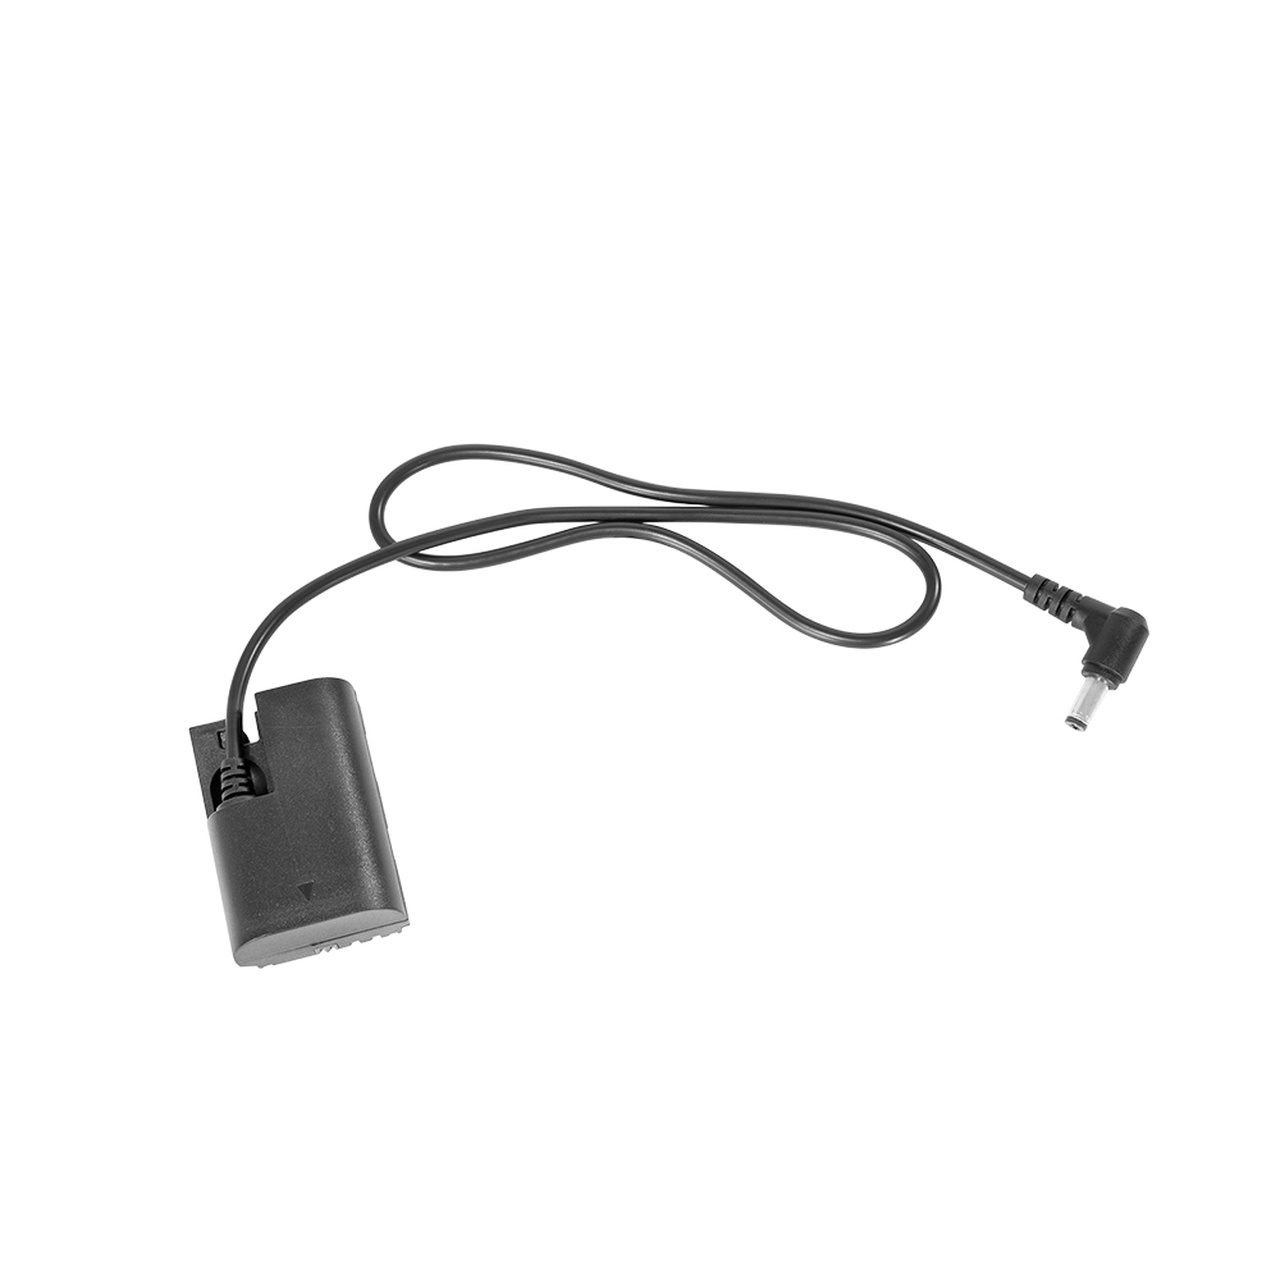 SmallRig DC5521 to LP-E6 Dummy Battery Charging Cable